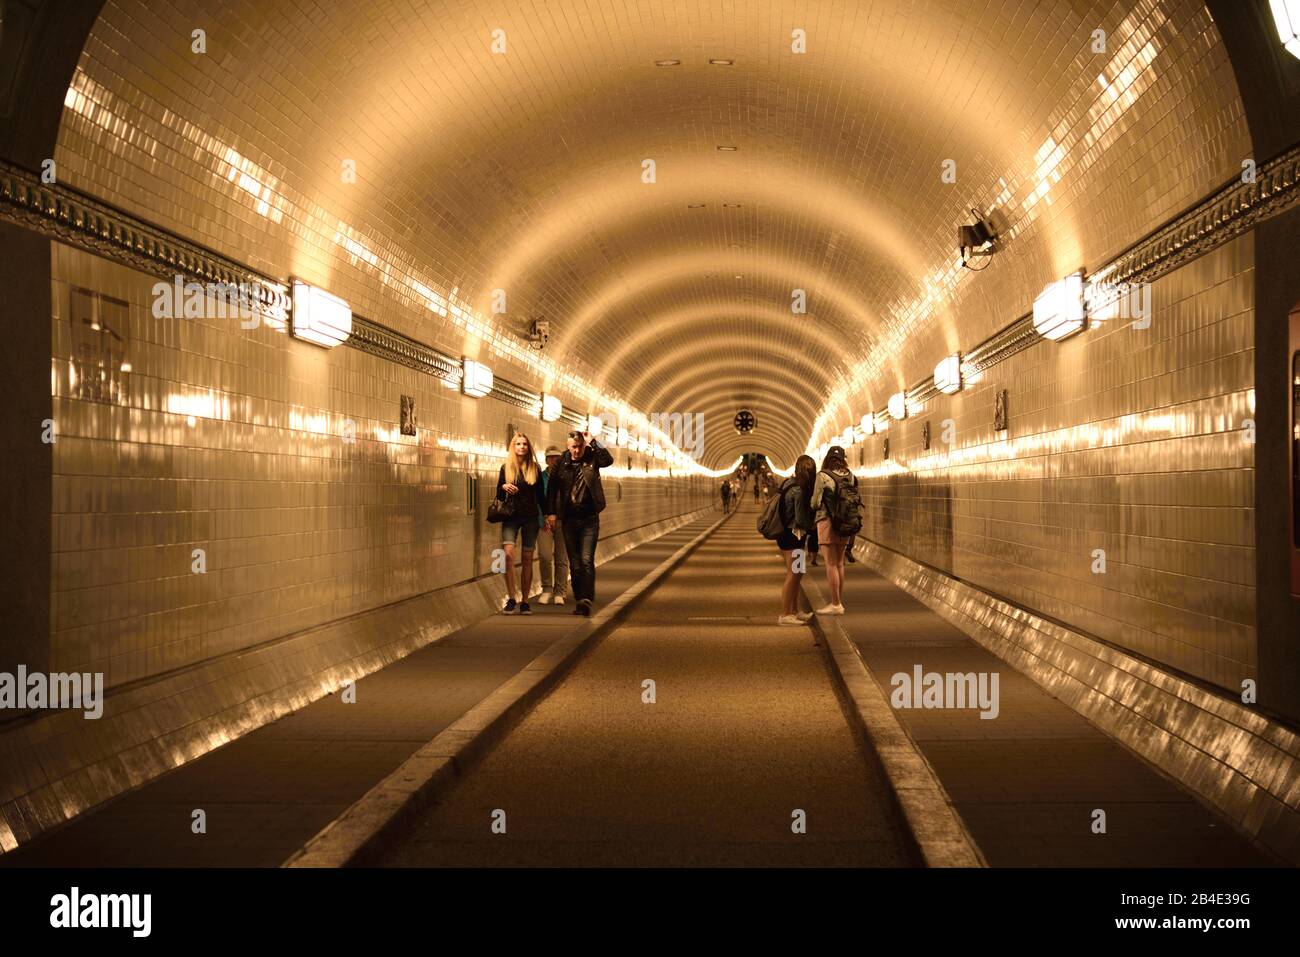 Europe, Germany, Hamburg, City, harbor, Alter Elbtunnel under the Elbe, restored eastern tube, interior view, connection between St. Pauli and harbor, built in 1911, Stock Photo